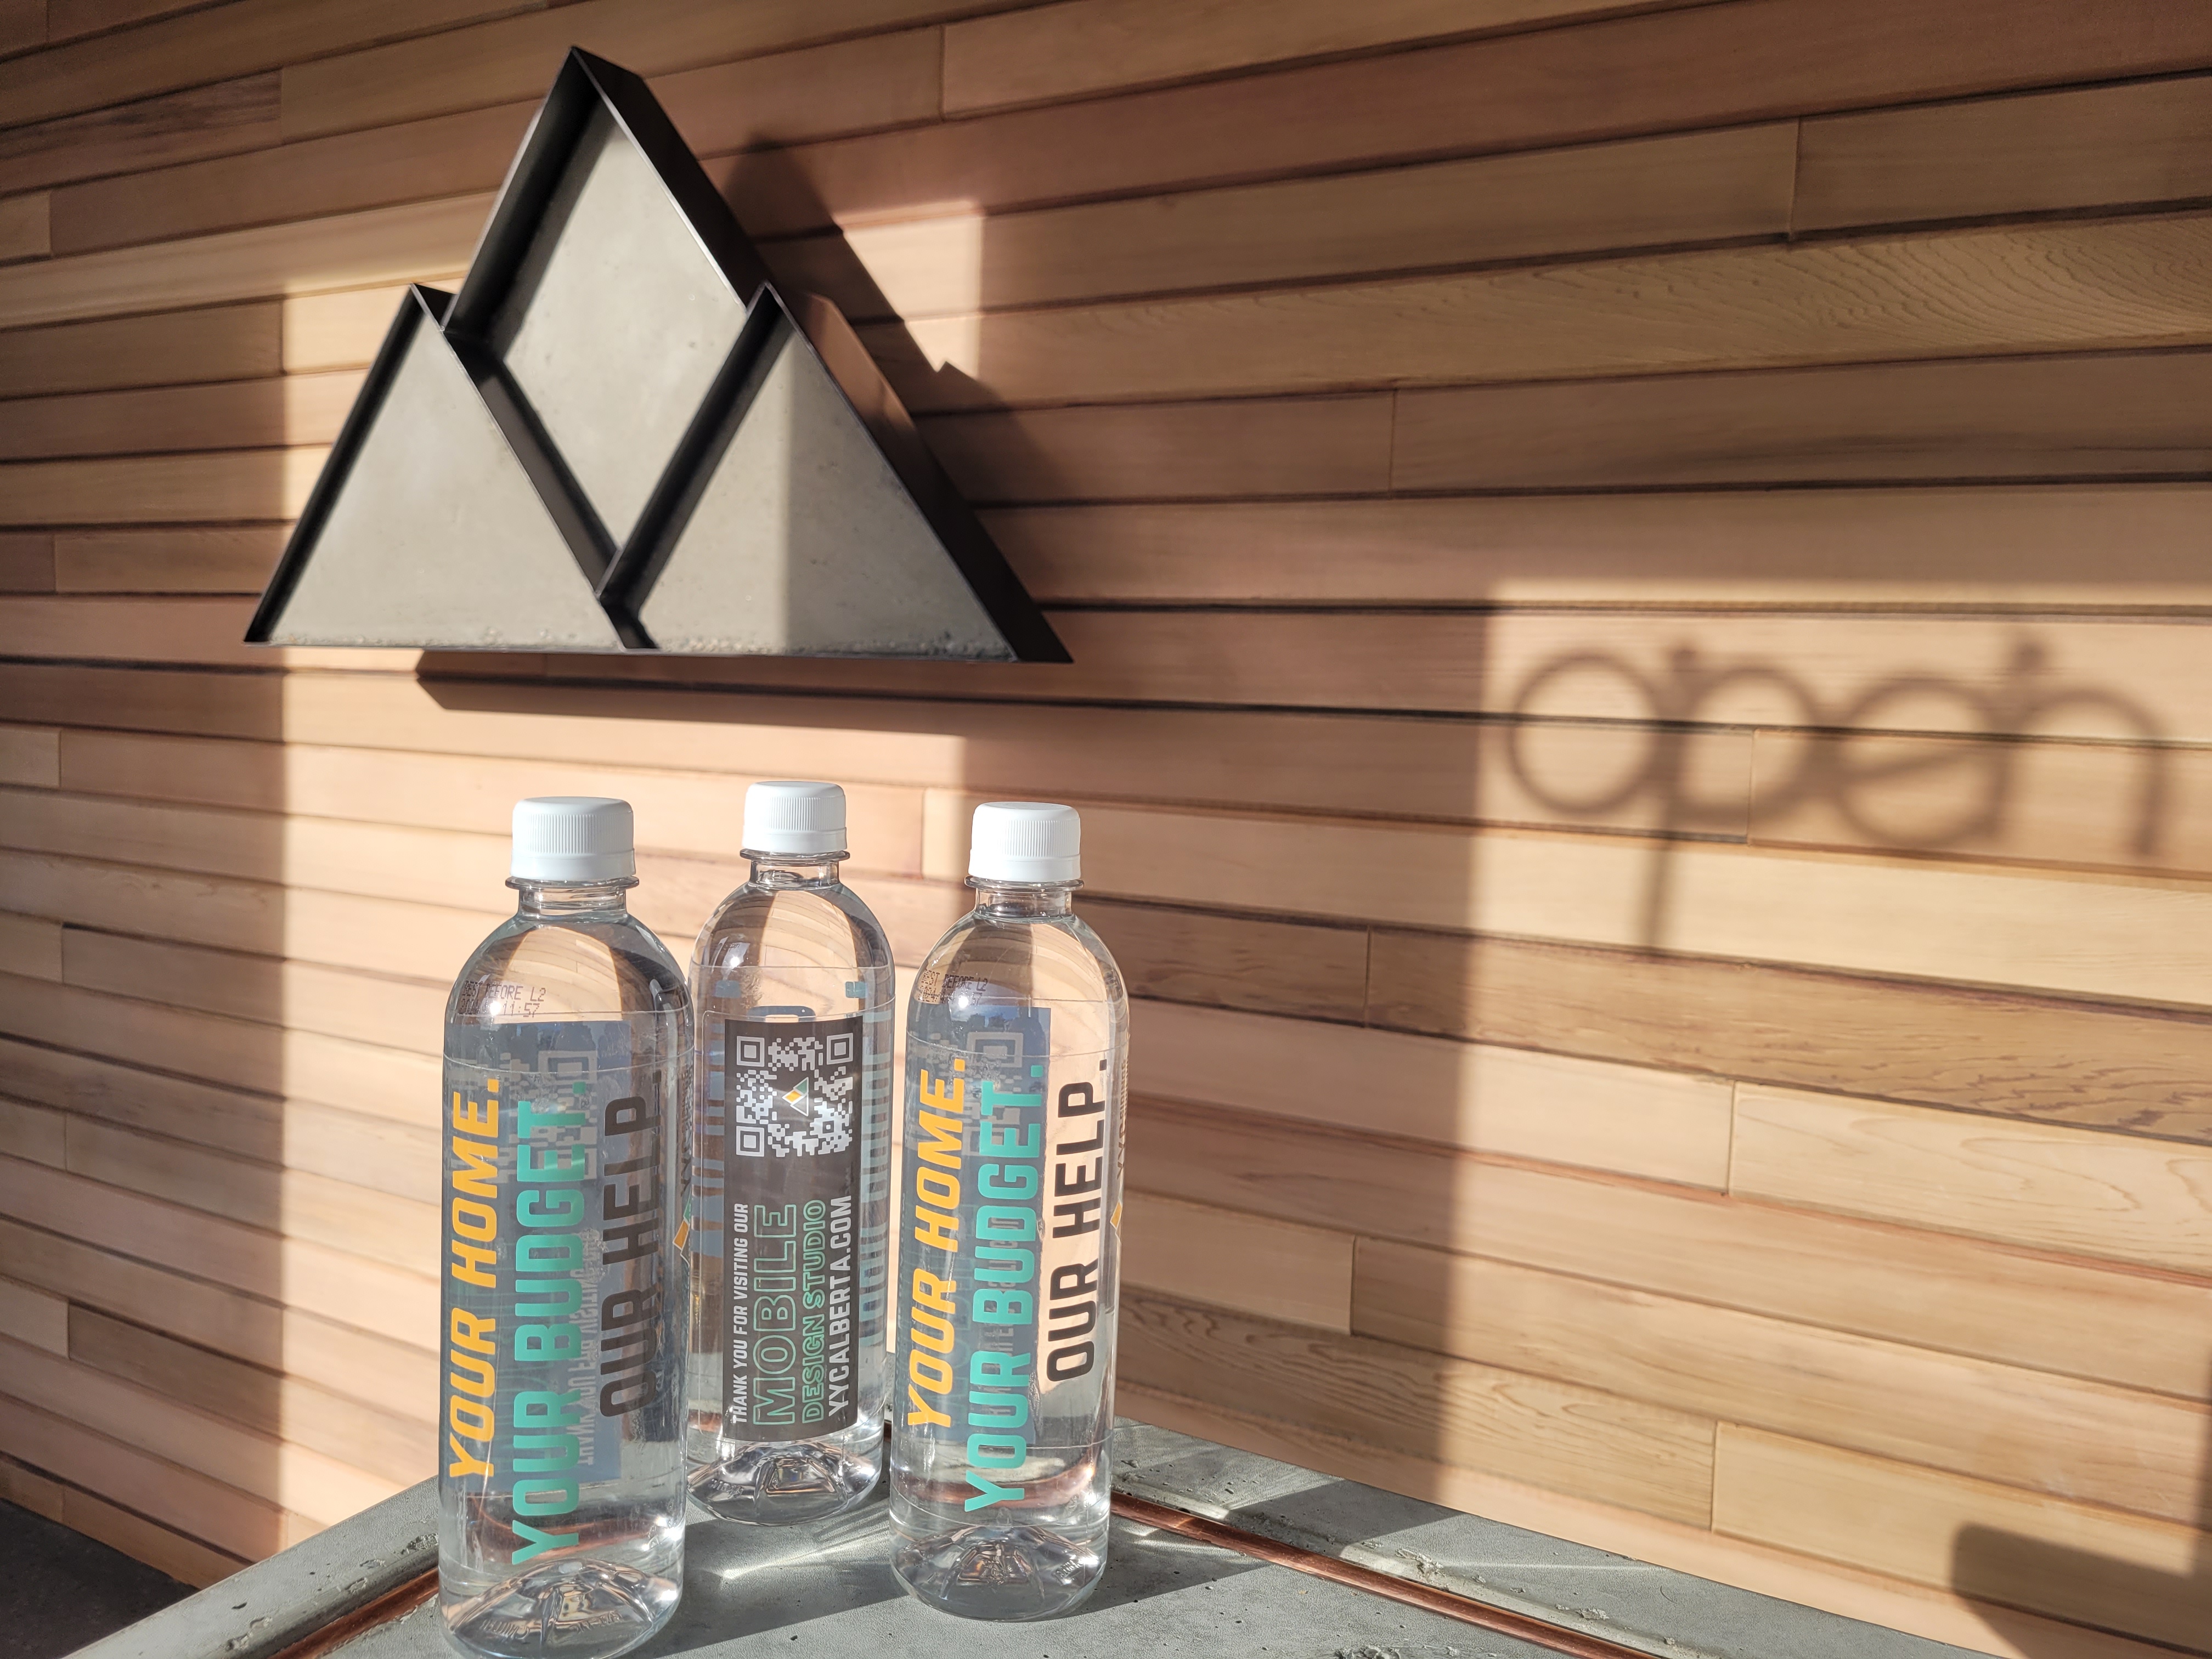 Branded Bottled Water by YYC Sliding and Roofing - Brand 16.9 oz bottled water with the option of purified or spring water. Brand the label with your logo and graphics. Available at brandspirit.